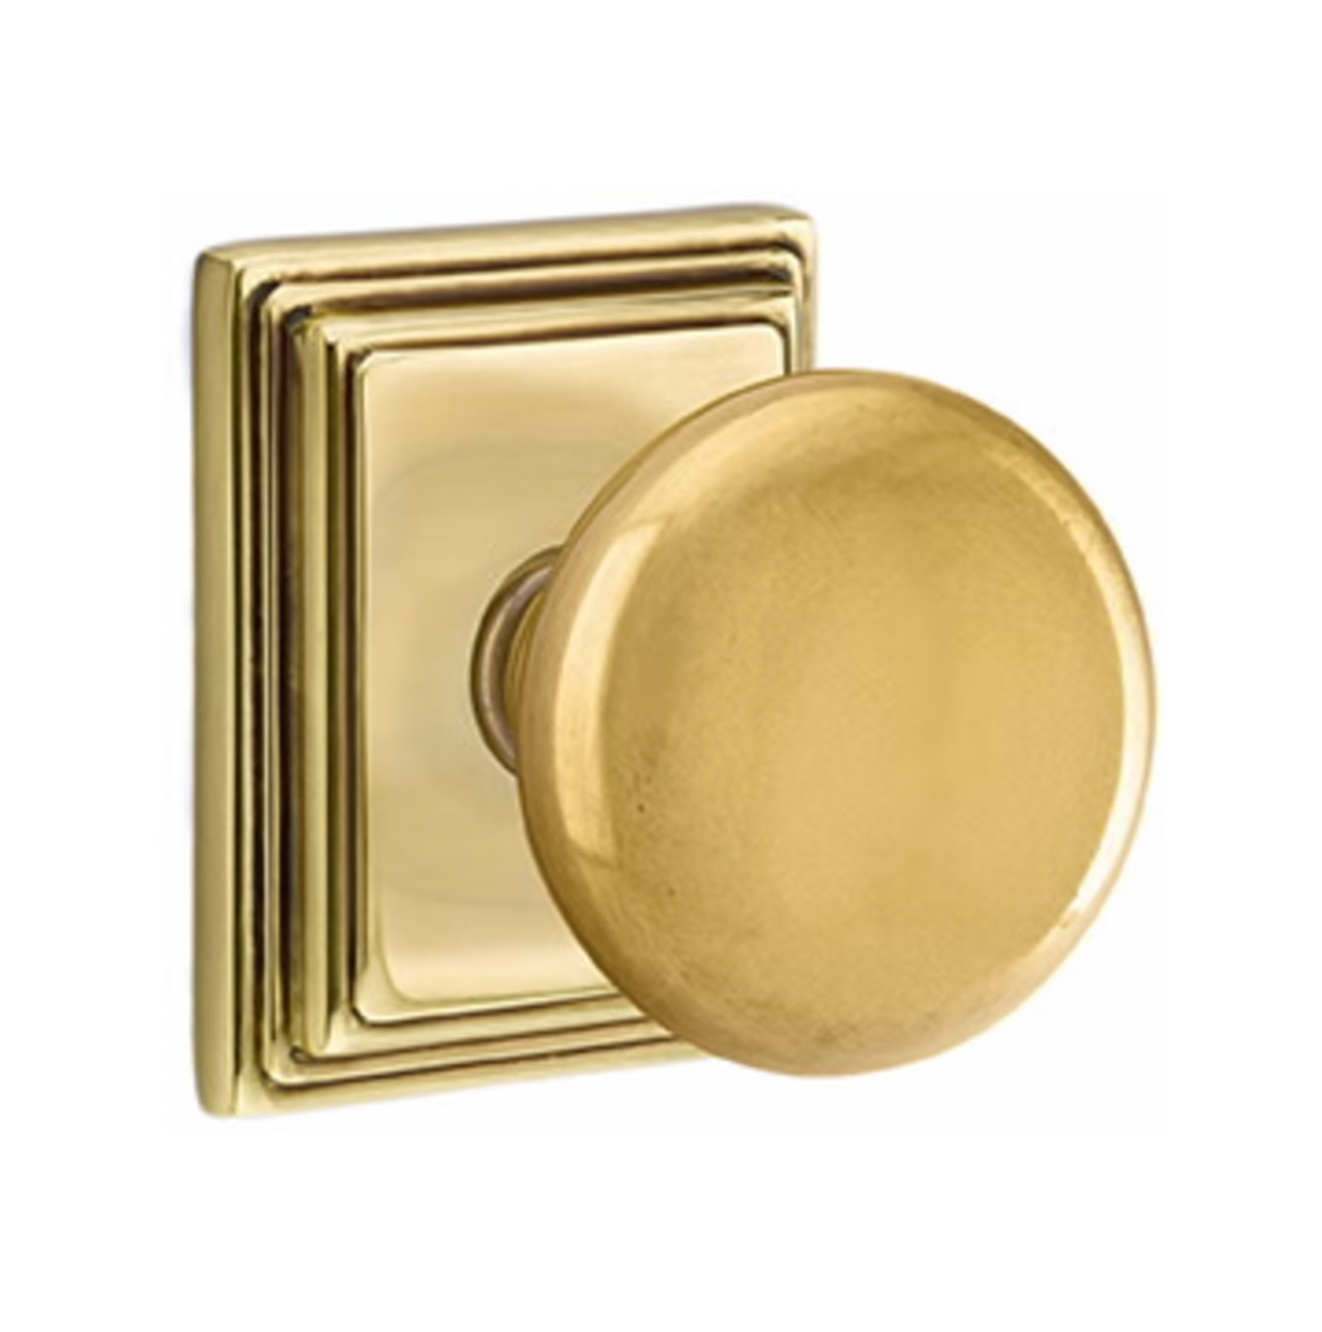 Round Door Knob "Provence" w/ Square Ridge Rosette in French Brass - Industry Hardware